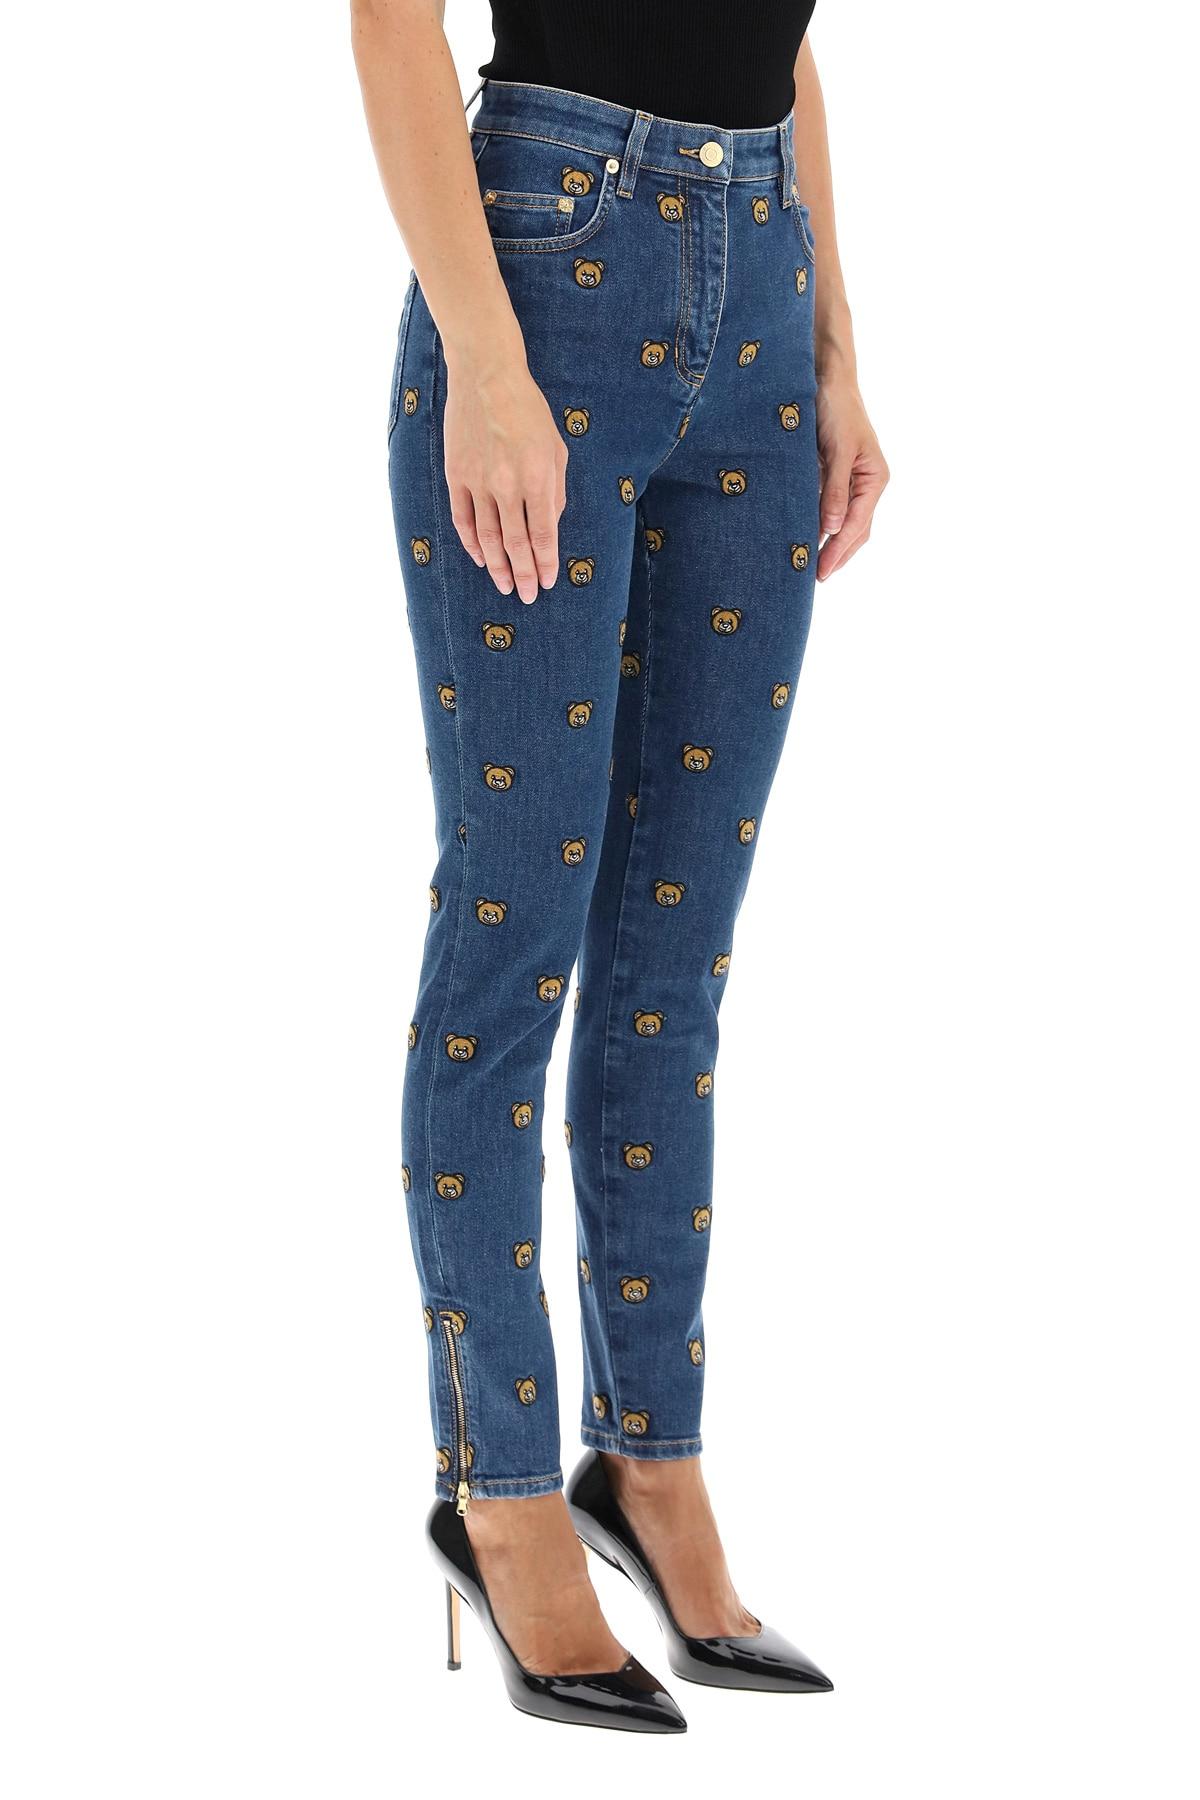 Moschino All-over Teddy Bear Embroidered Denim Jeans in Blue 